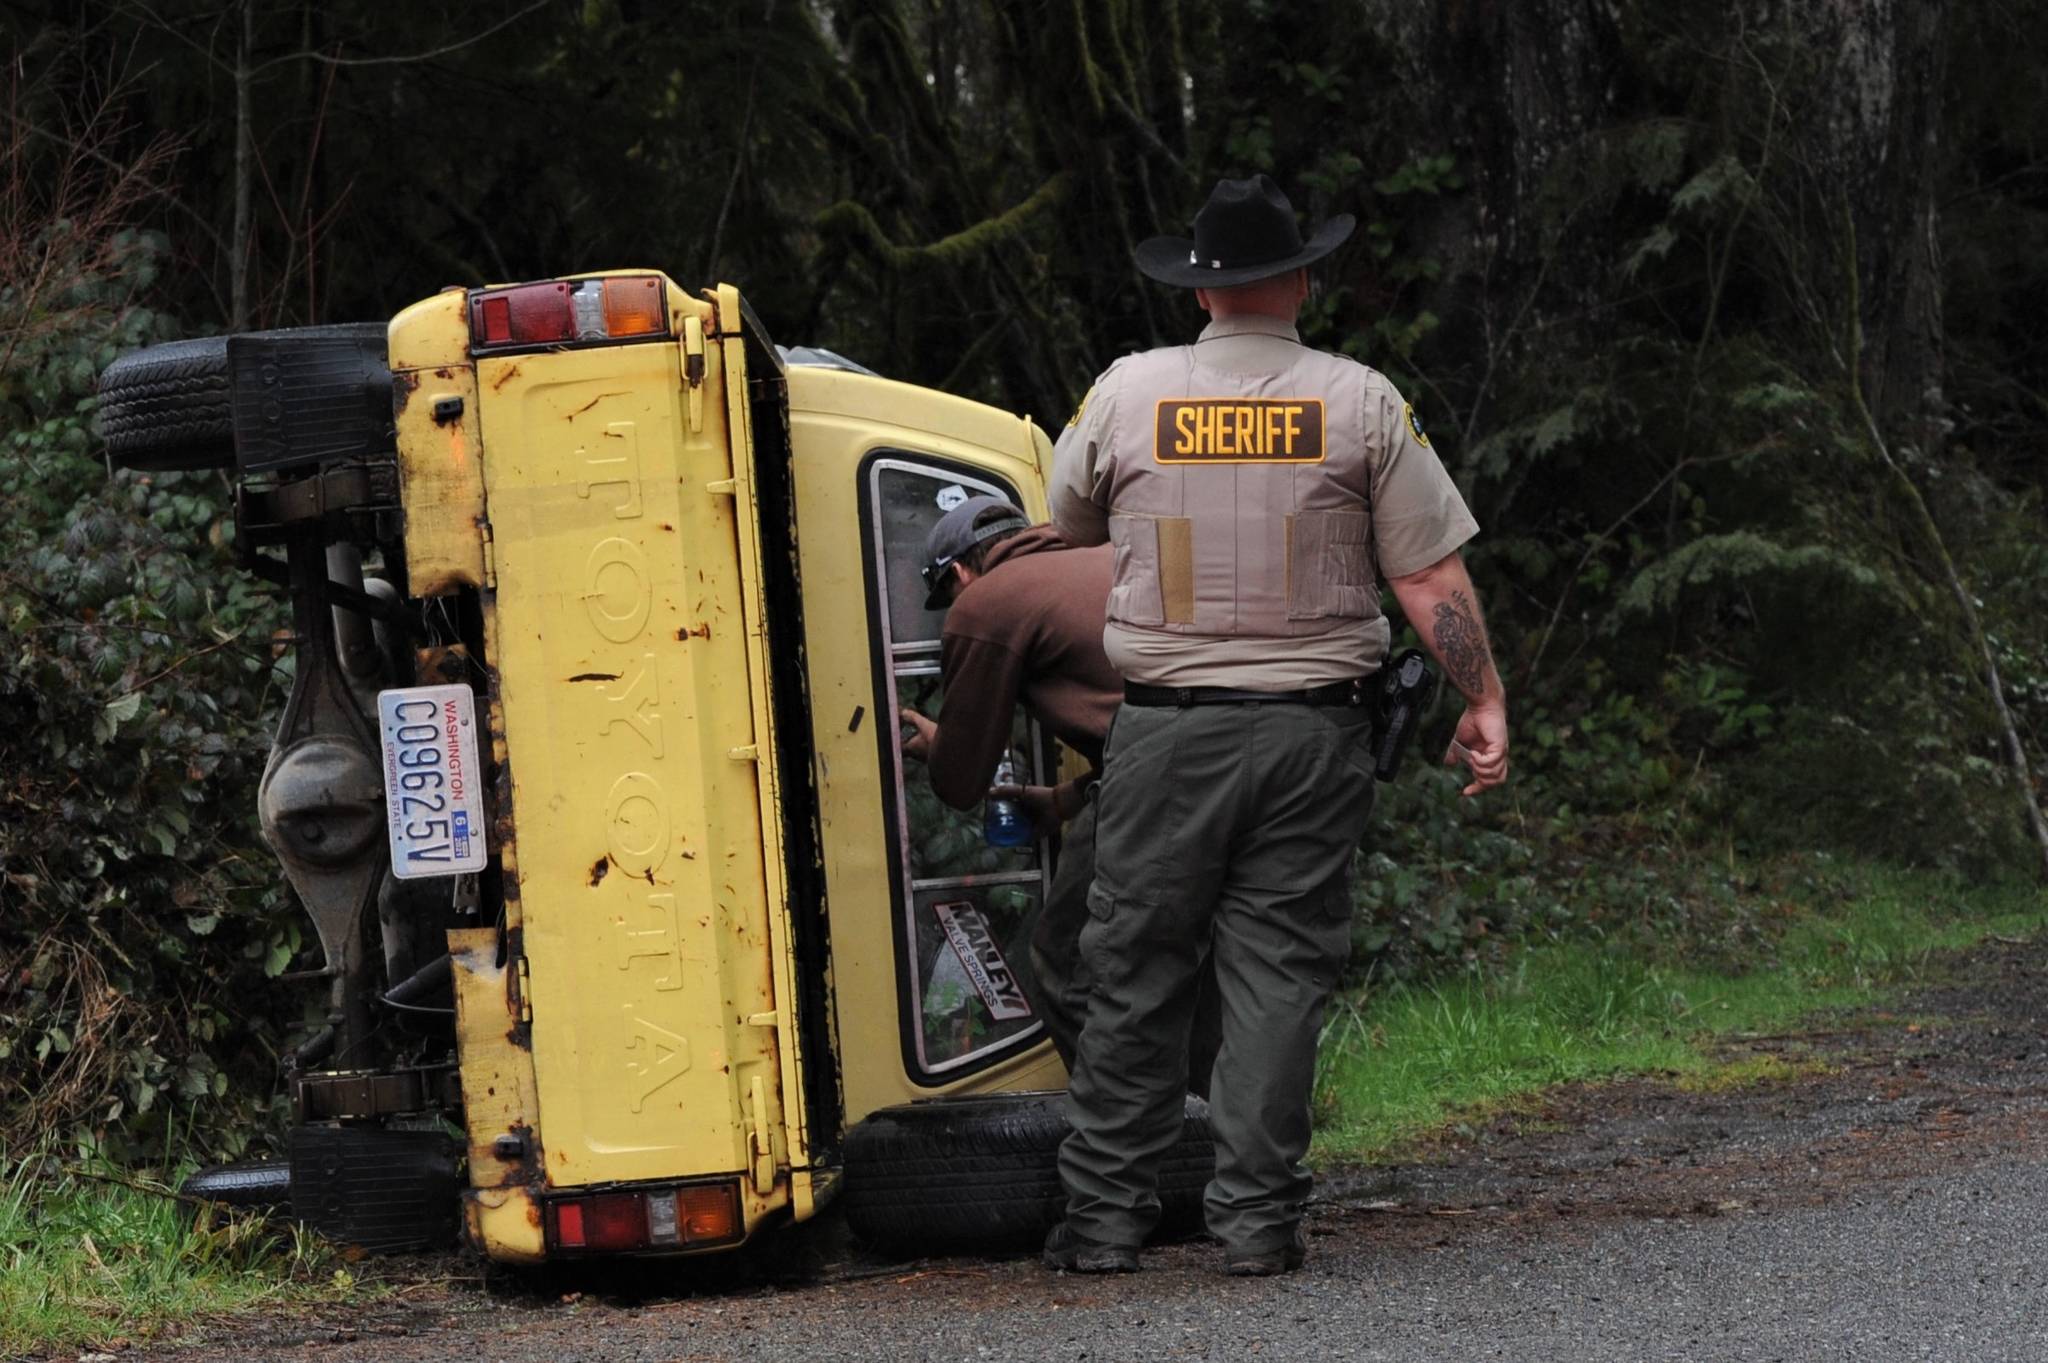 A Clallam County Sheriff deputy inspects the scene of a Toyota pickup which ended on its side at the Junction of Highway 101 and Shuwah Road at approximately 3 p.m. Wednesday March 24. Also responding were Fire district 1, Forks police, and the Forks Ambulance crew. Photo by Lonnie Archibald